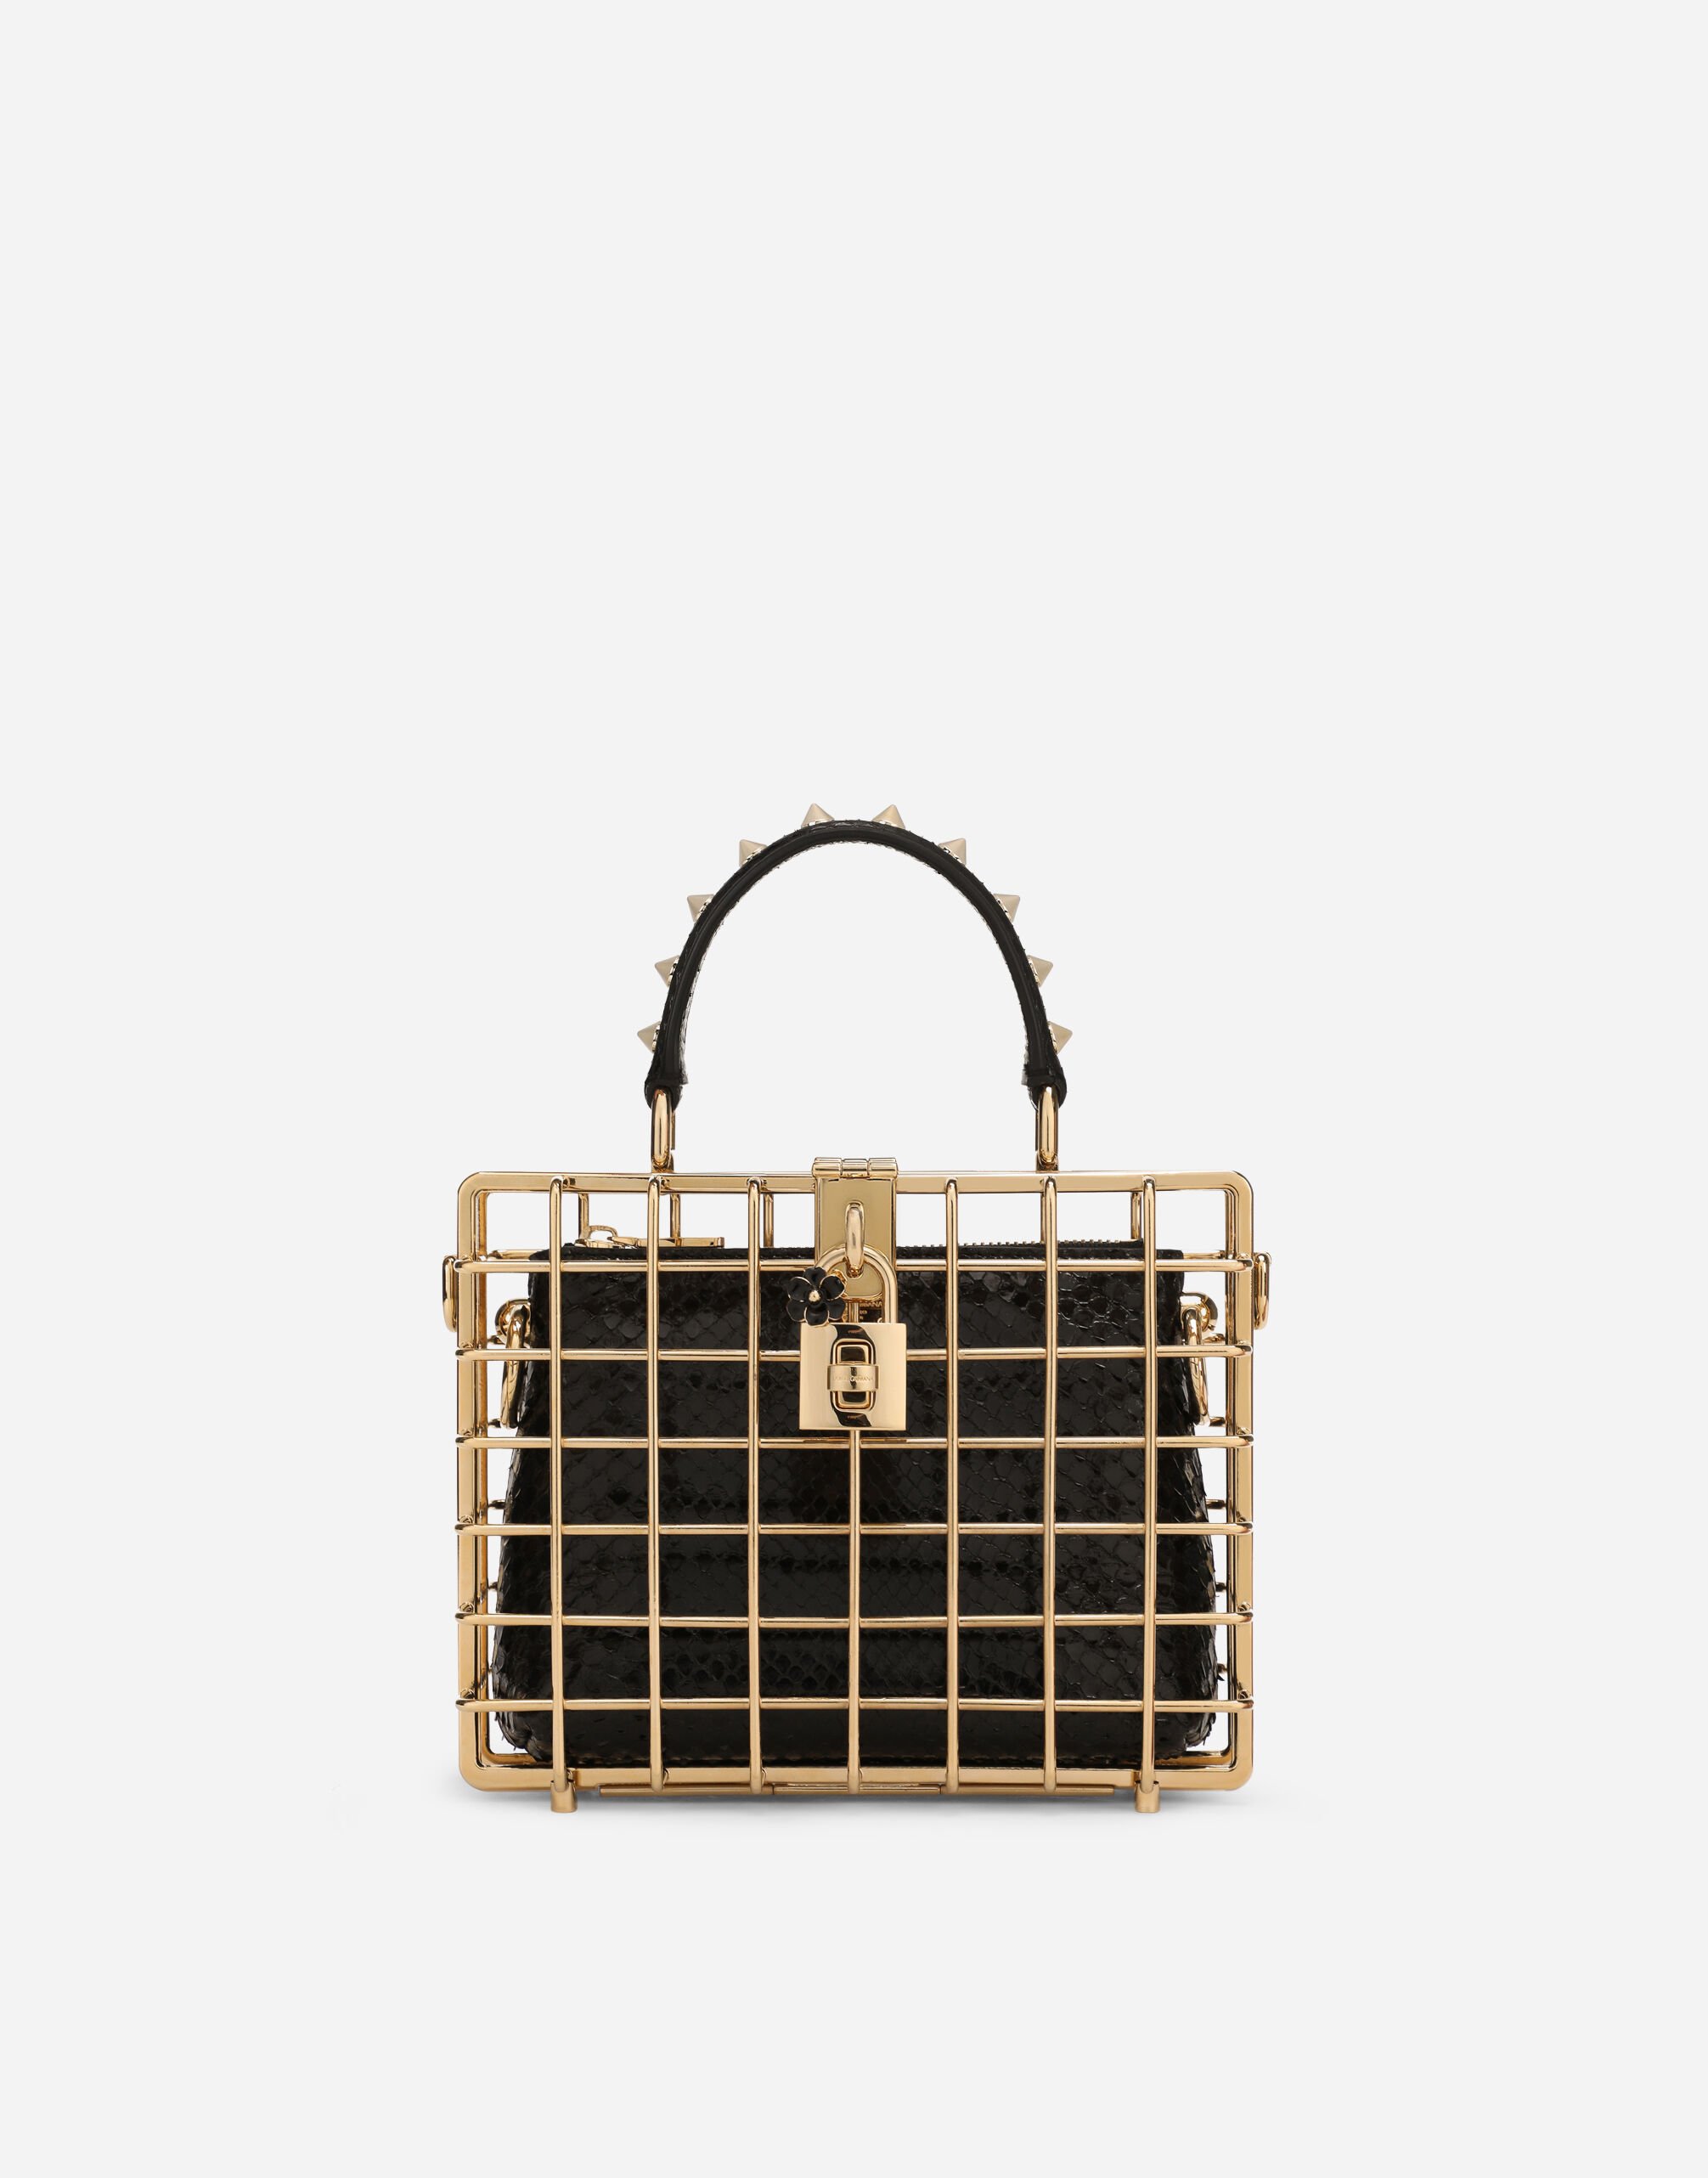 Dolce & Gabbana Dolce Box bag in metal and ayers Black BB7625AU640